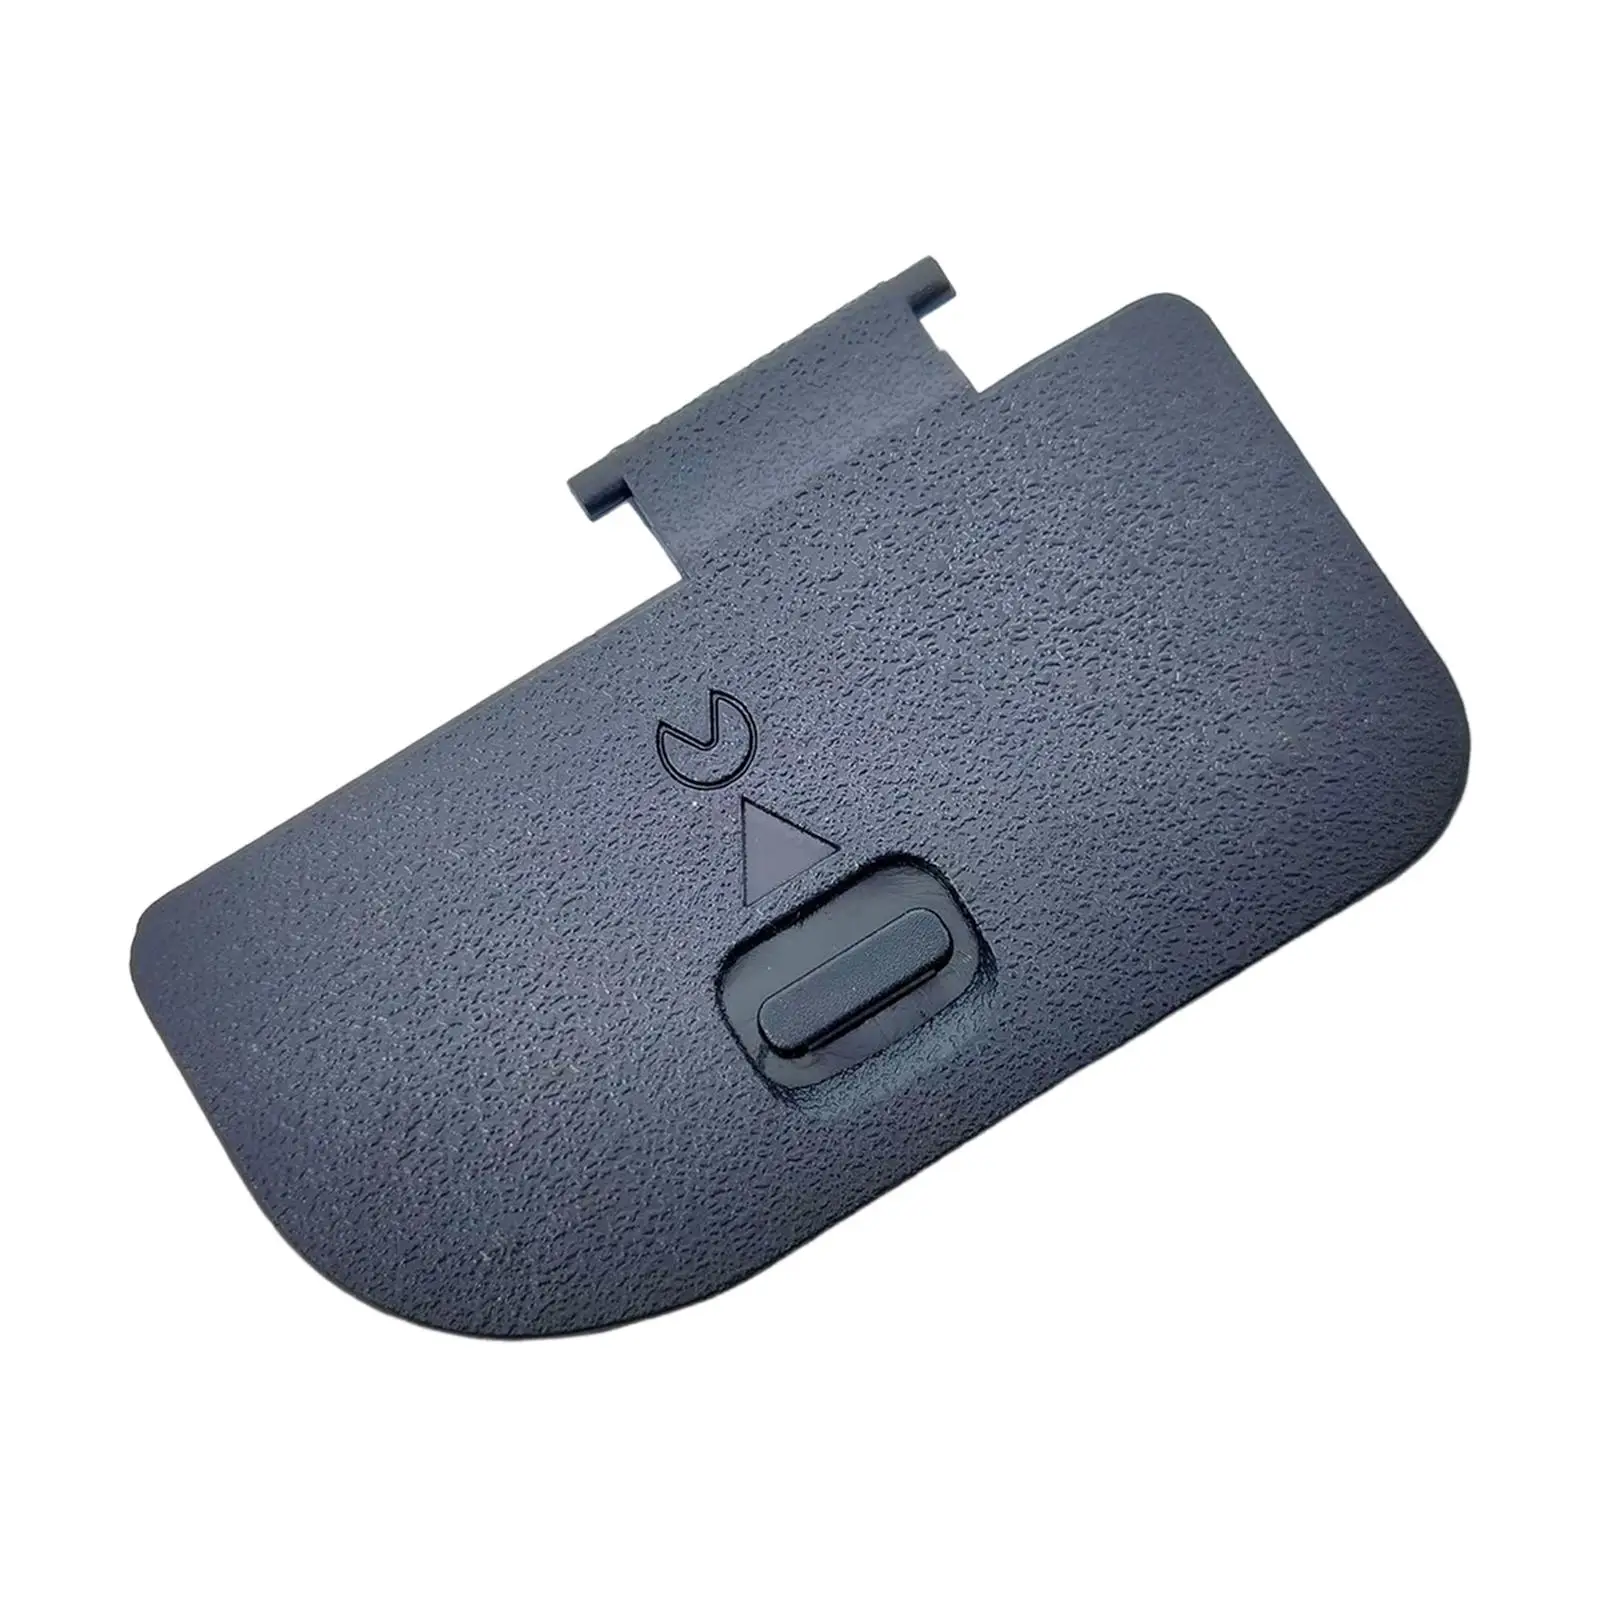 High Quality Battery Door Cover Lid Cap Replace Parts for Z6 Z7 Camera Accessories